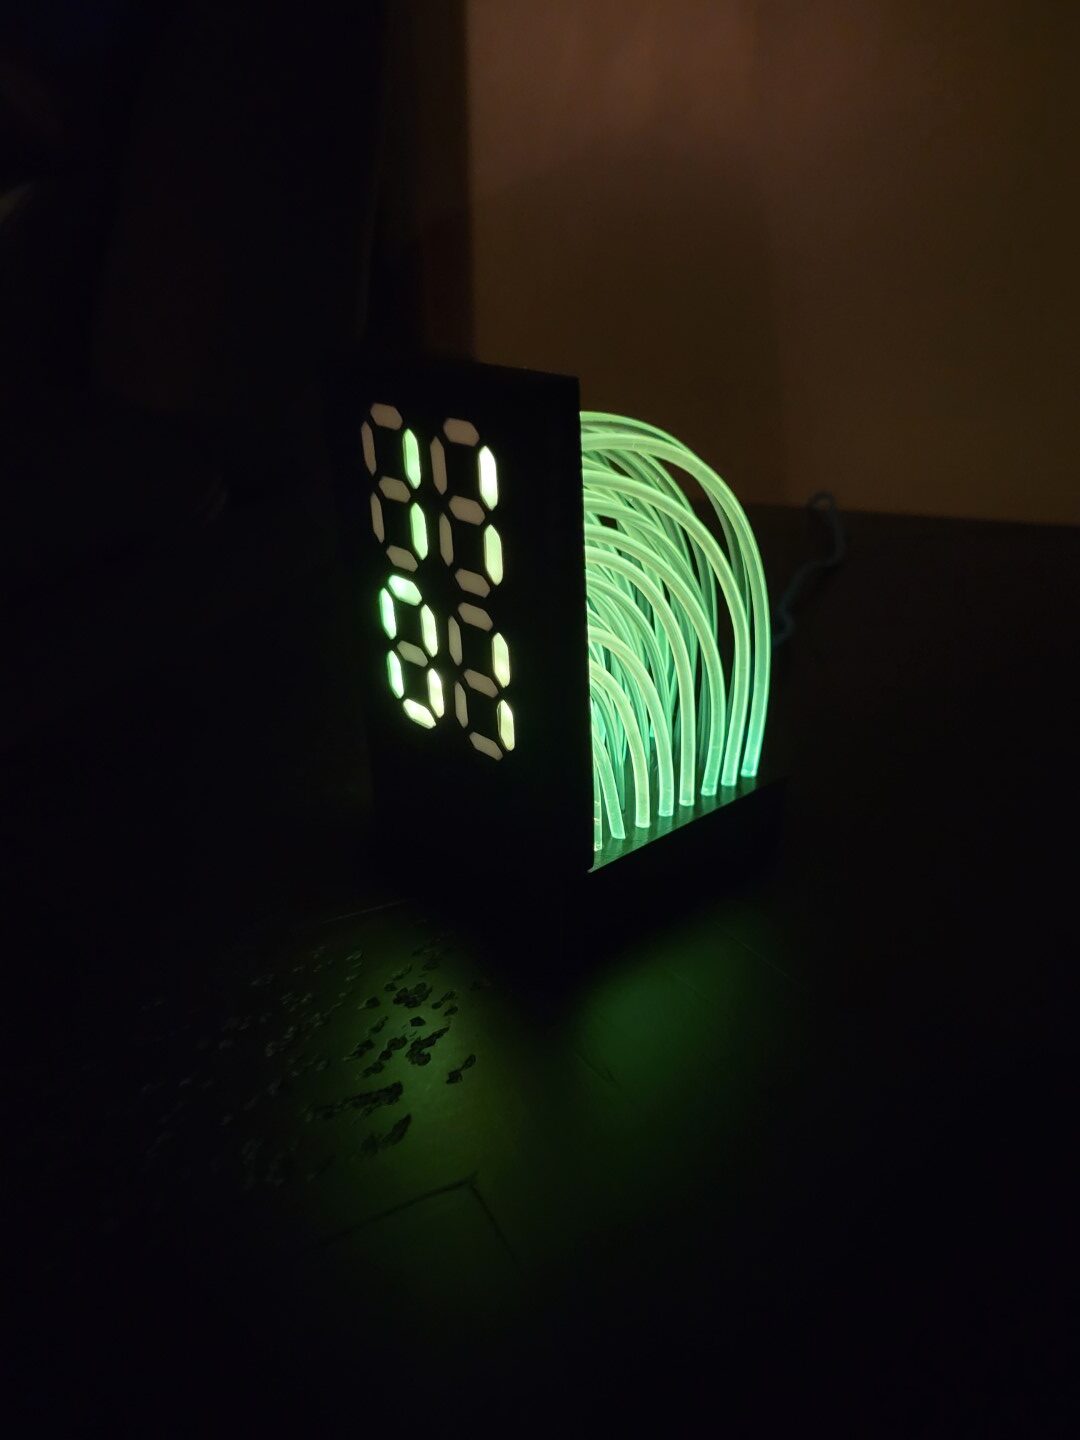 Build a DIY Digital Clock With Glowing, Flowing Light Pipes